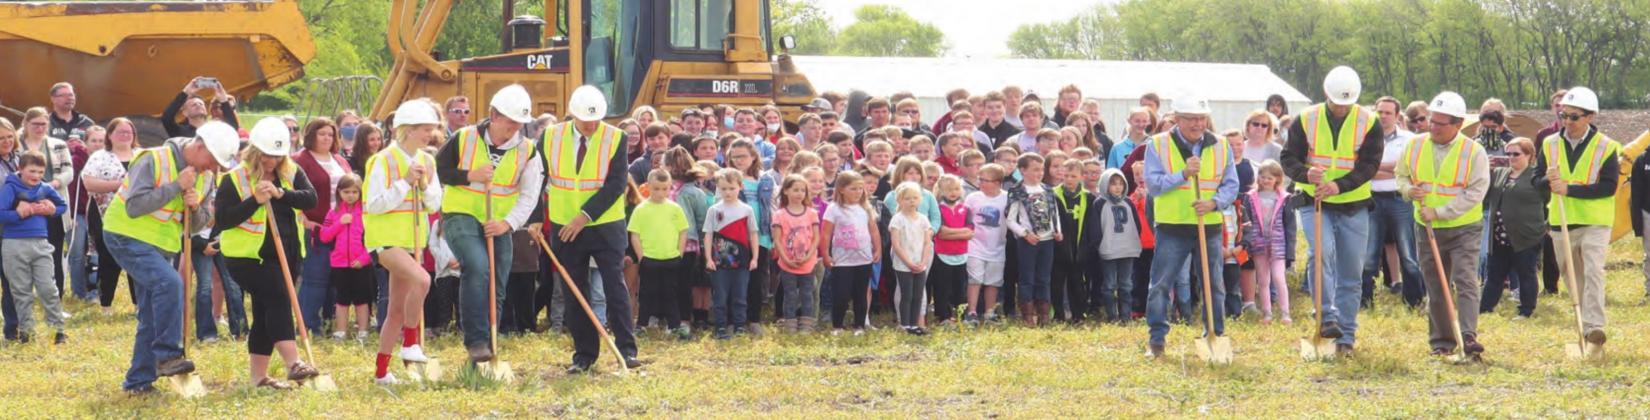 Lewiston Consolidatded Schools held a groundbreaking for its new $1.5 million track Monday. Ray Kappel/Republican